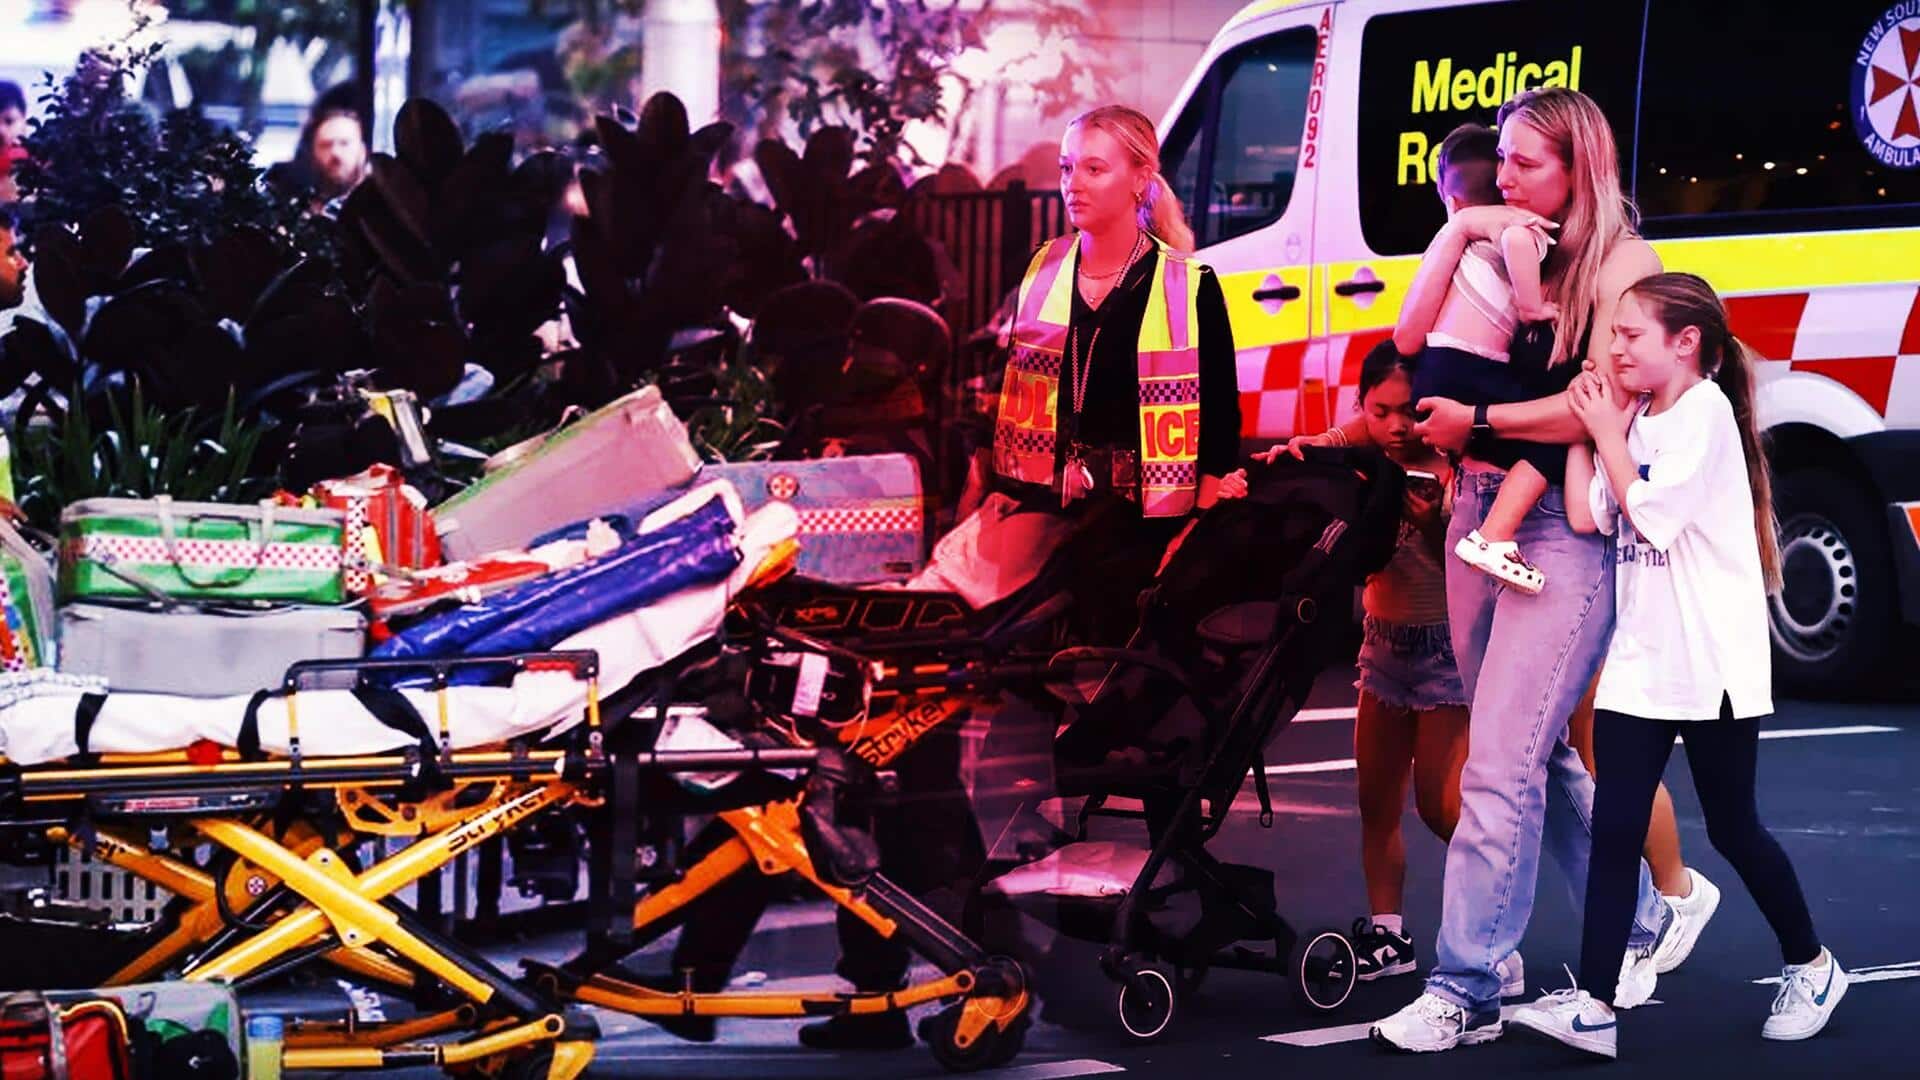 Sydney knife attack: Who are 6 victims of mass stabbing